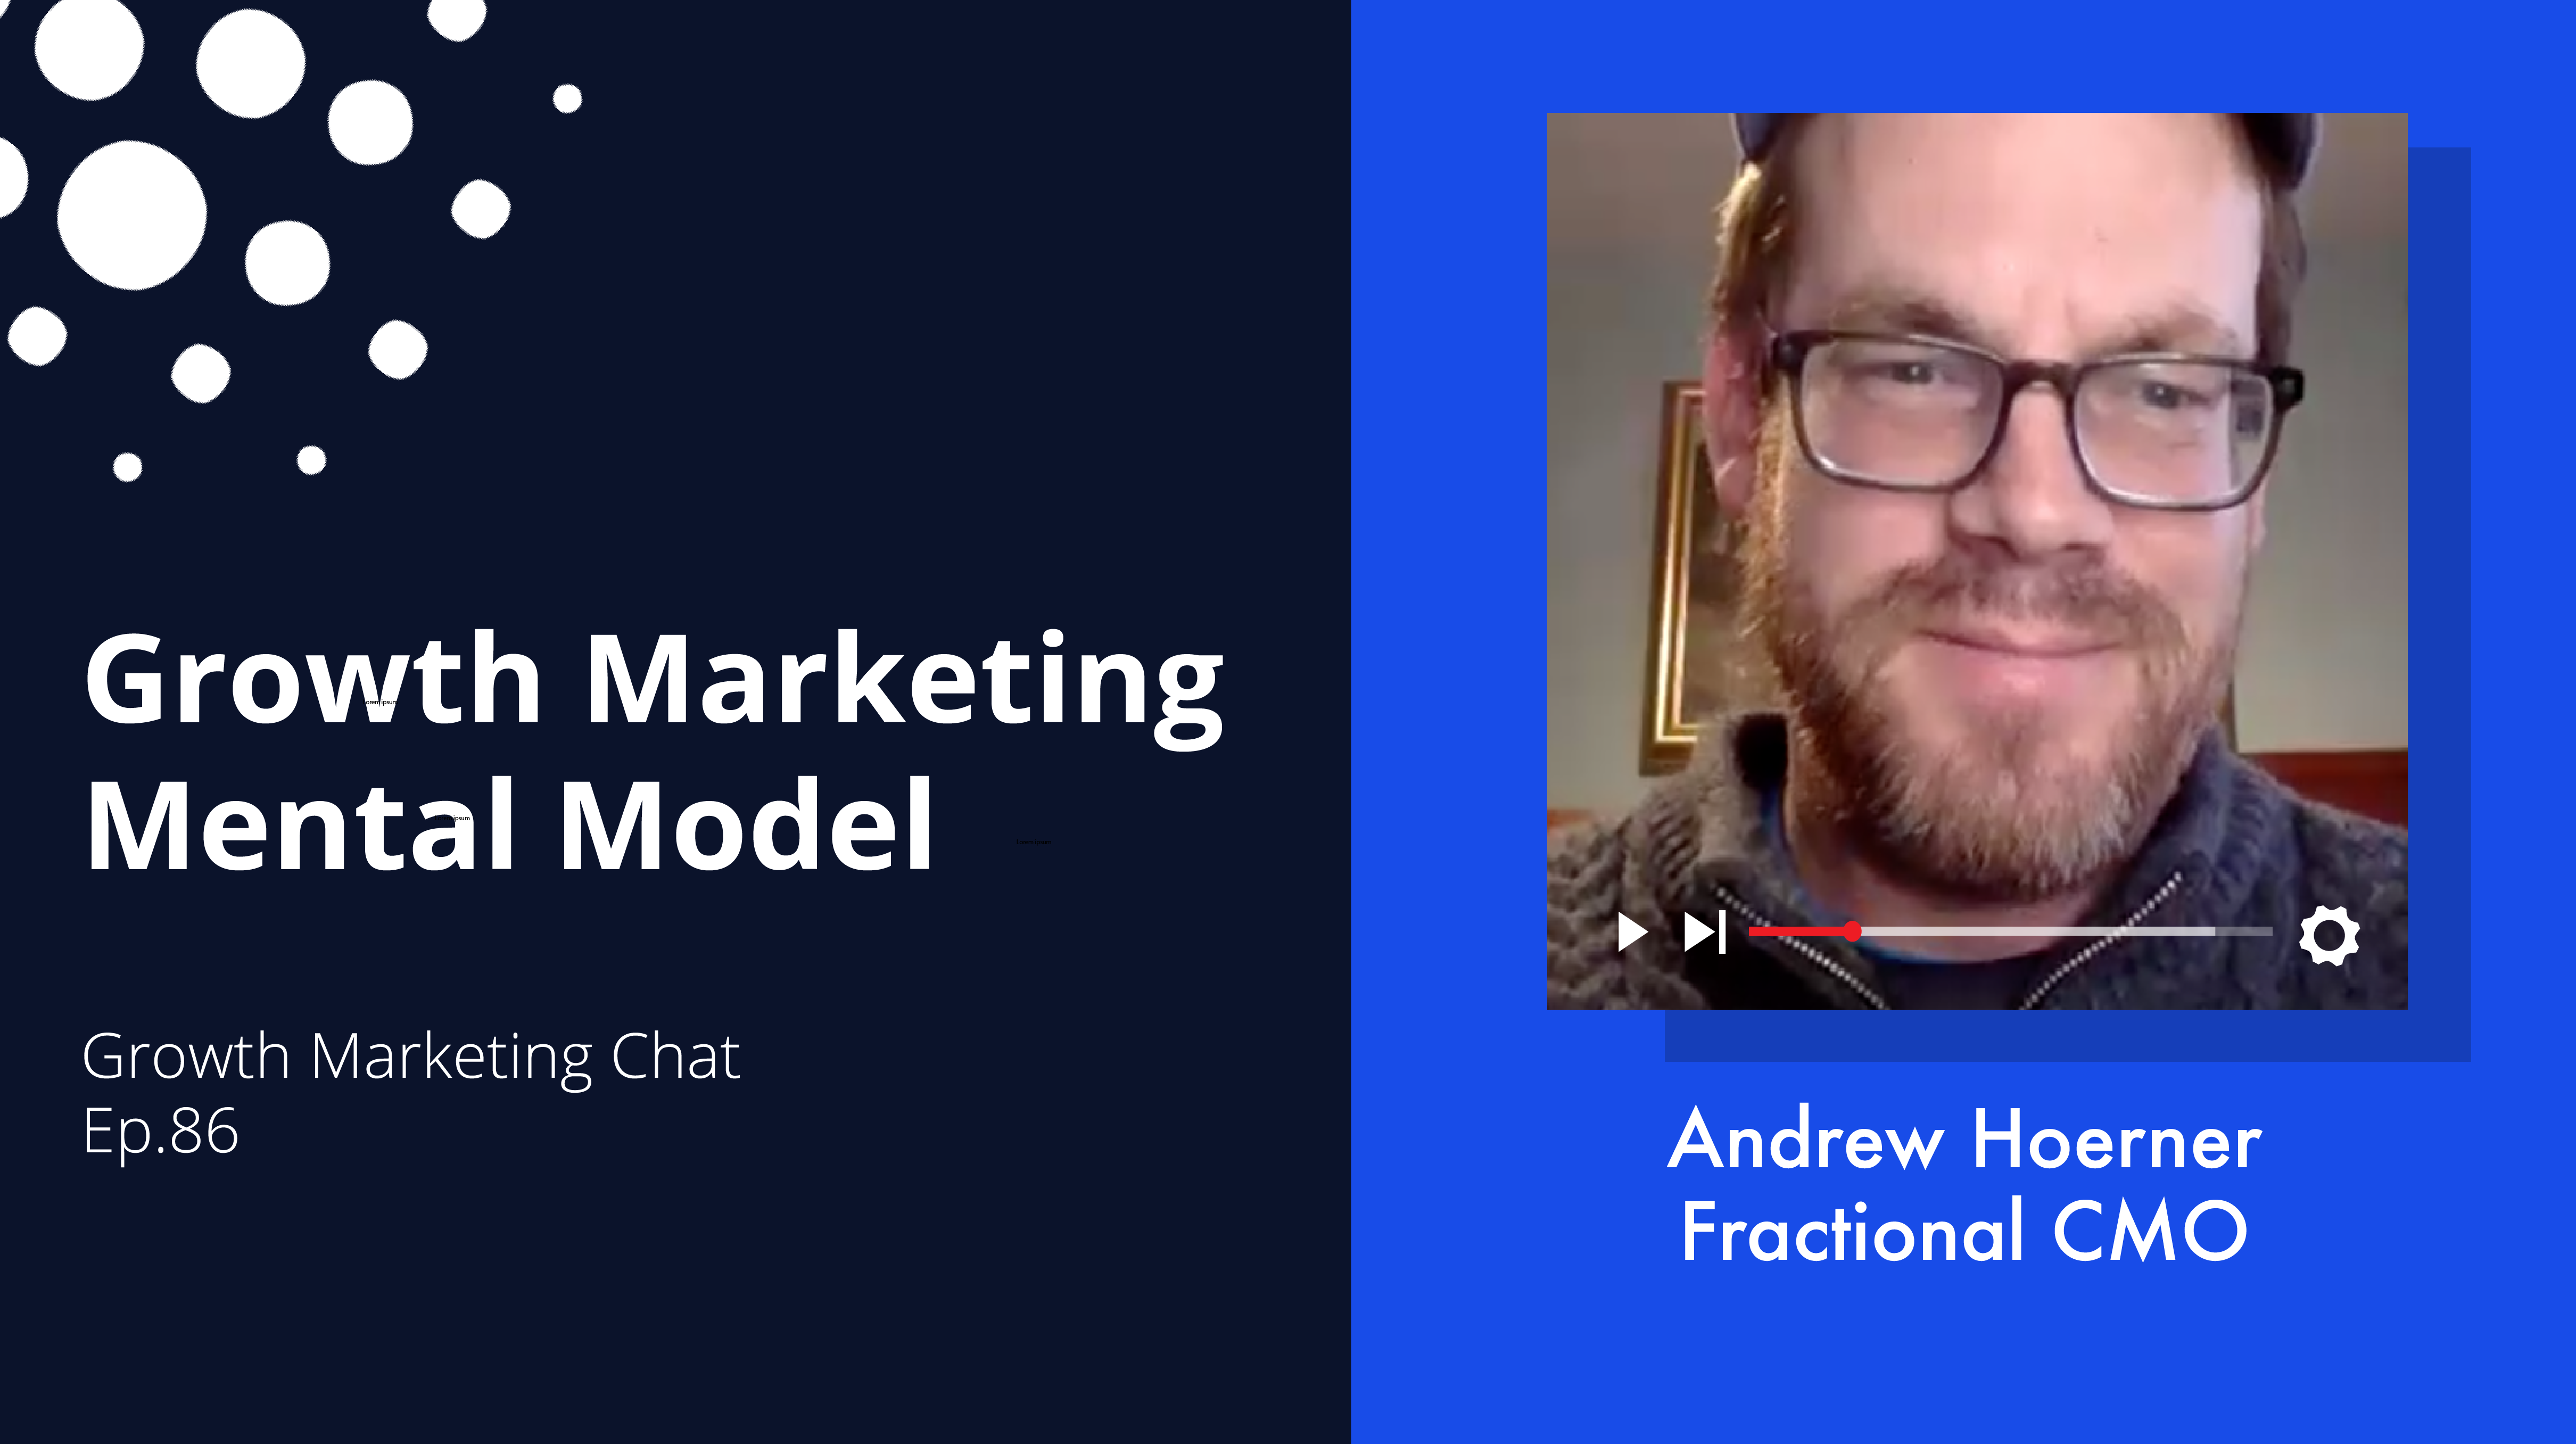 Growth Marketing Mental Model: What, How, and Why